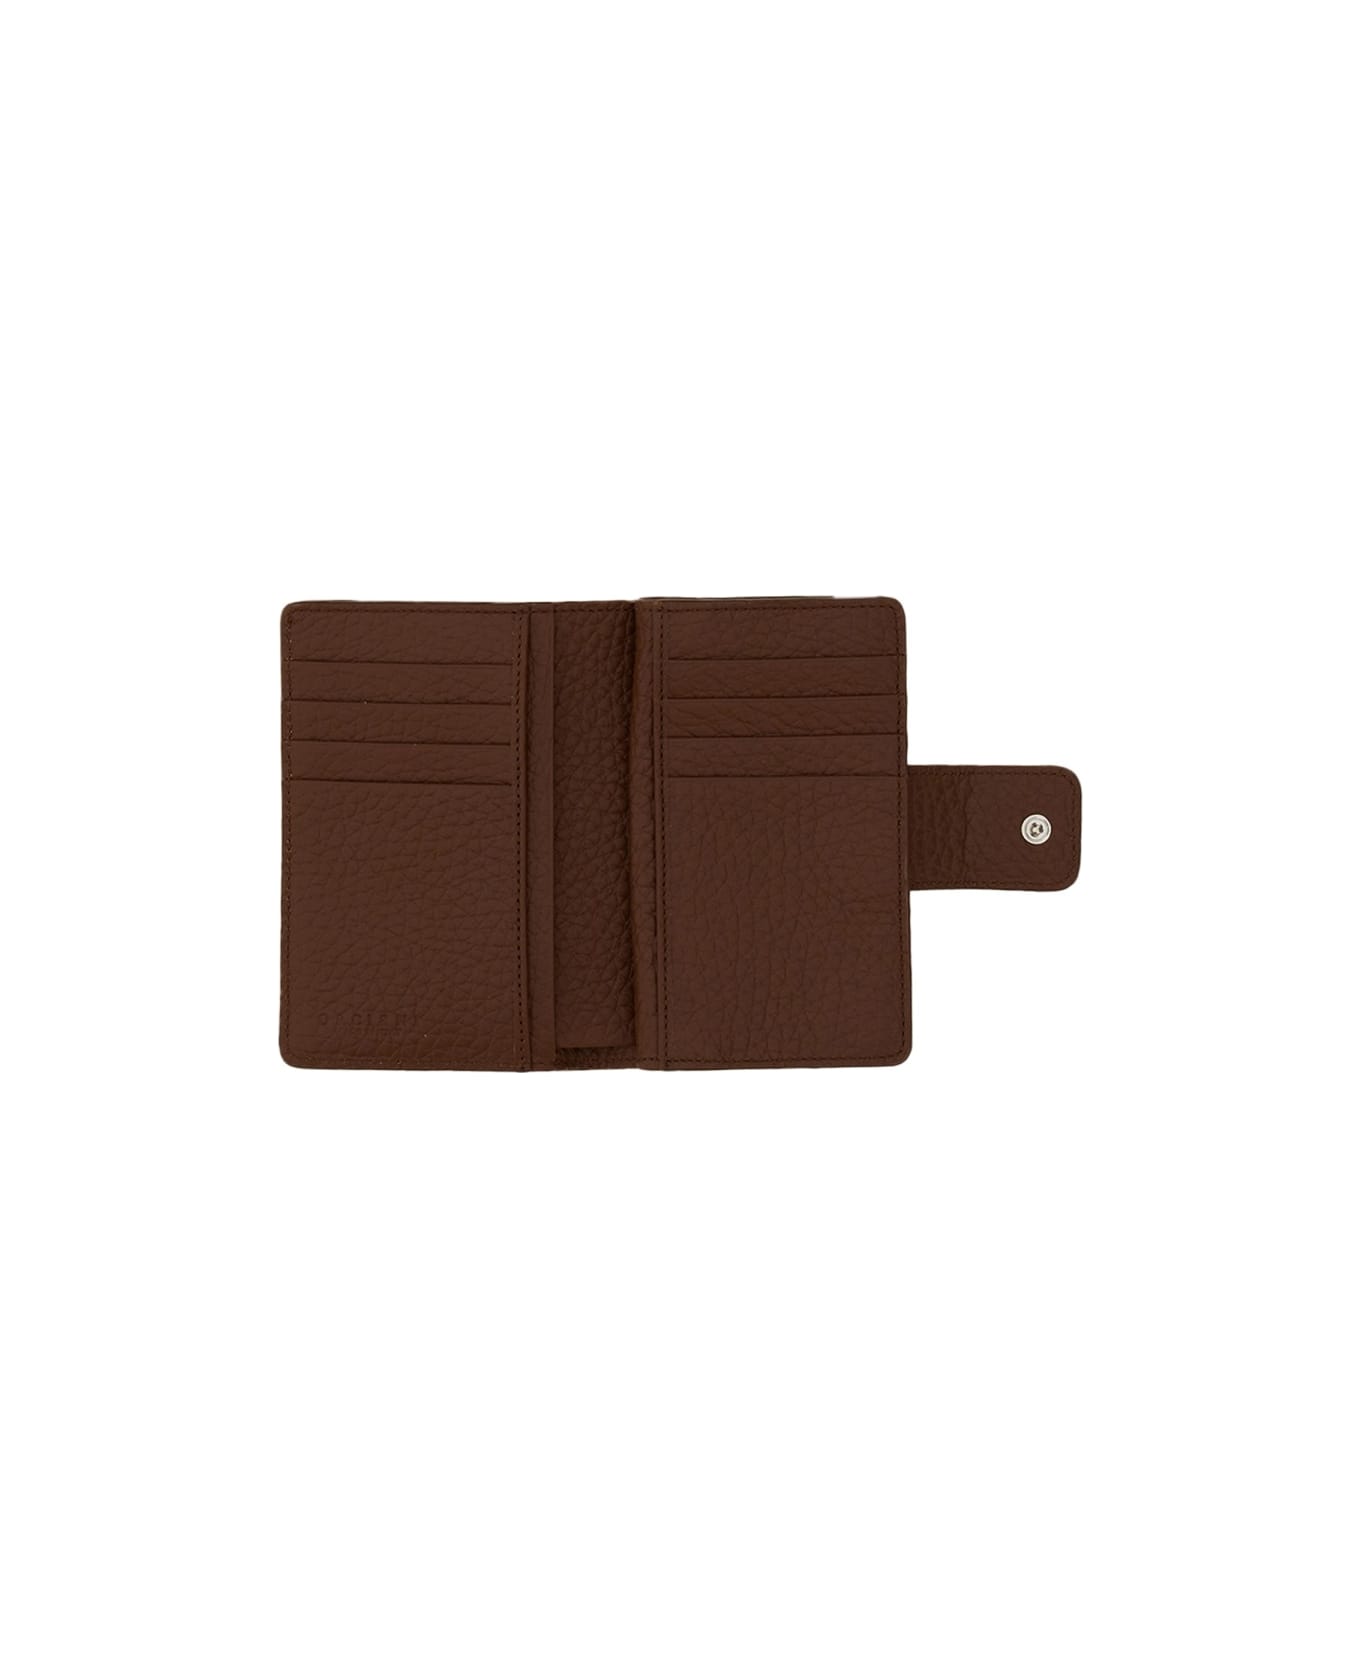 Orciani Soft Wallet - BROWN